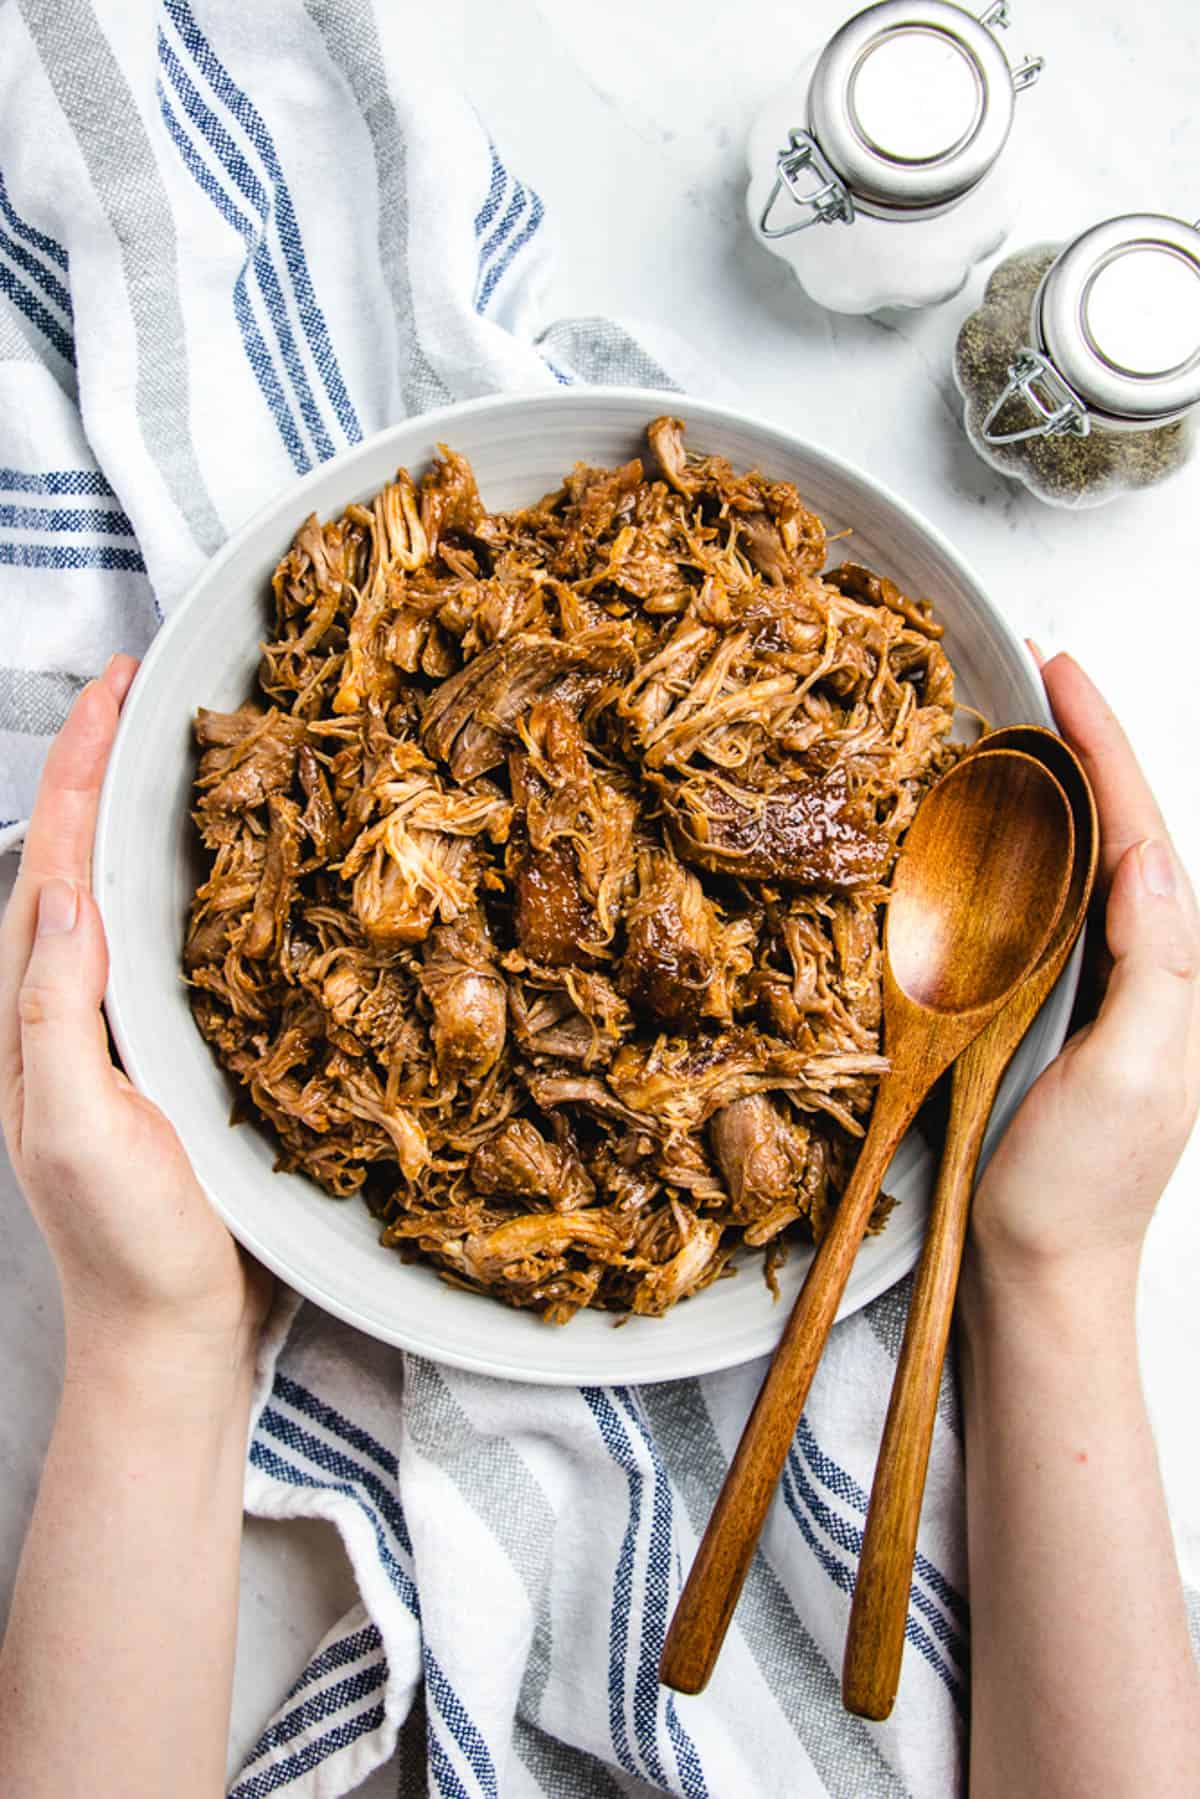 BBQ Pulled Pork in a bowl on a table.